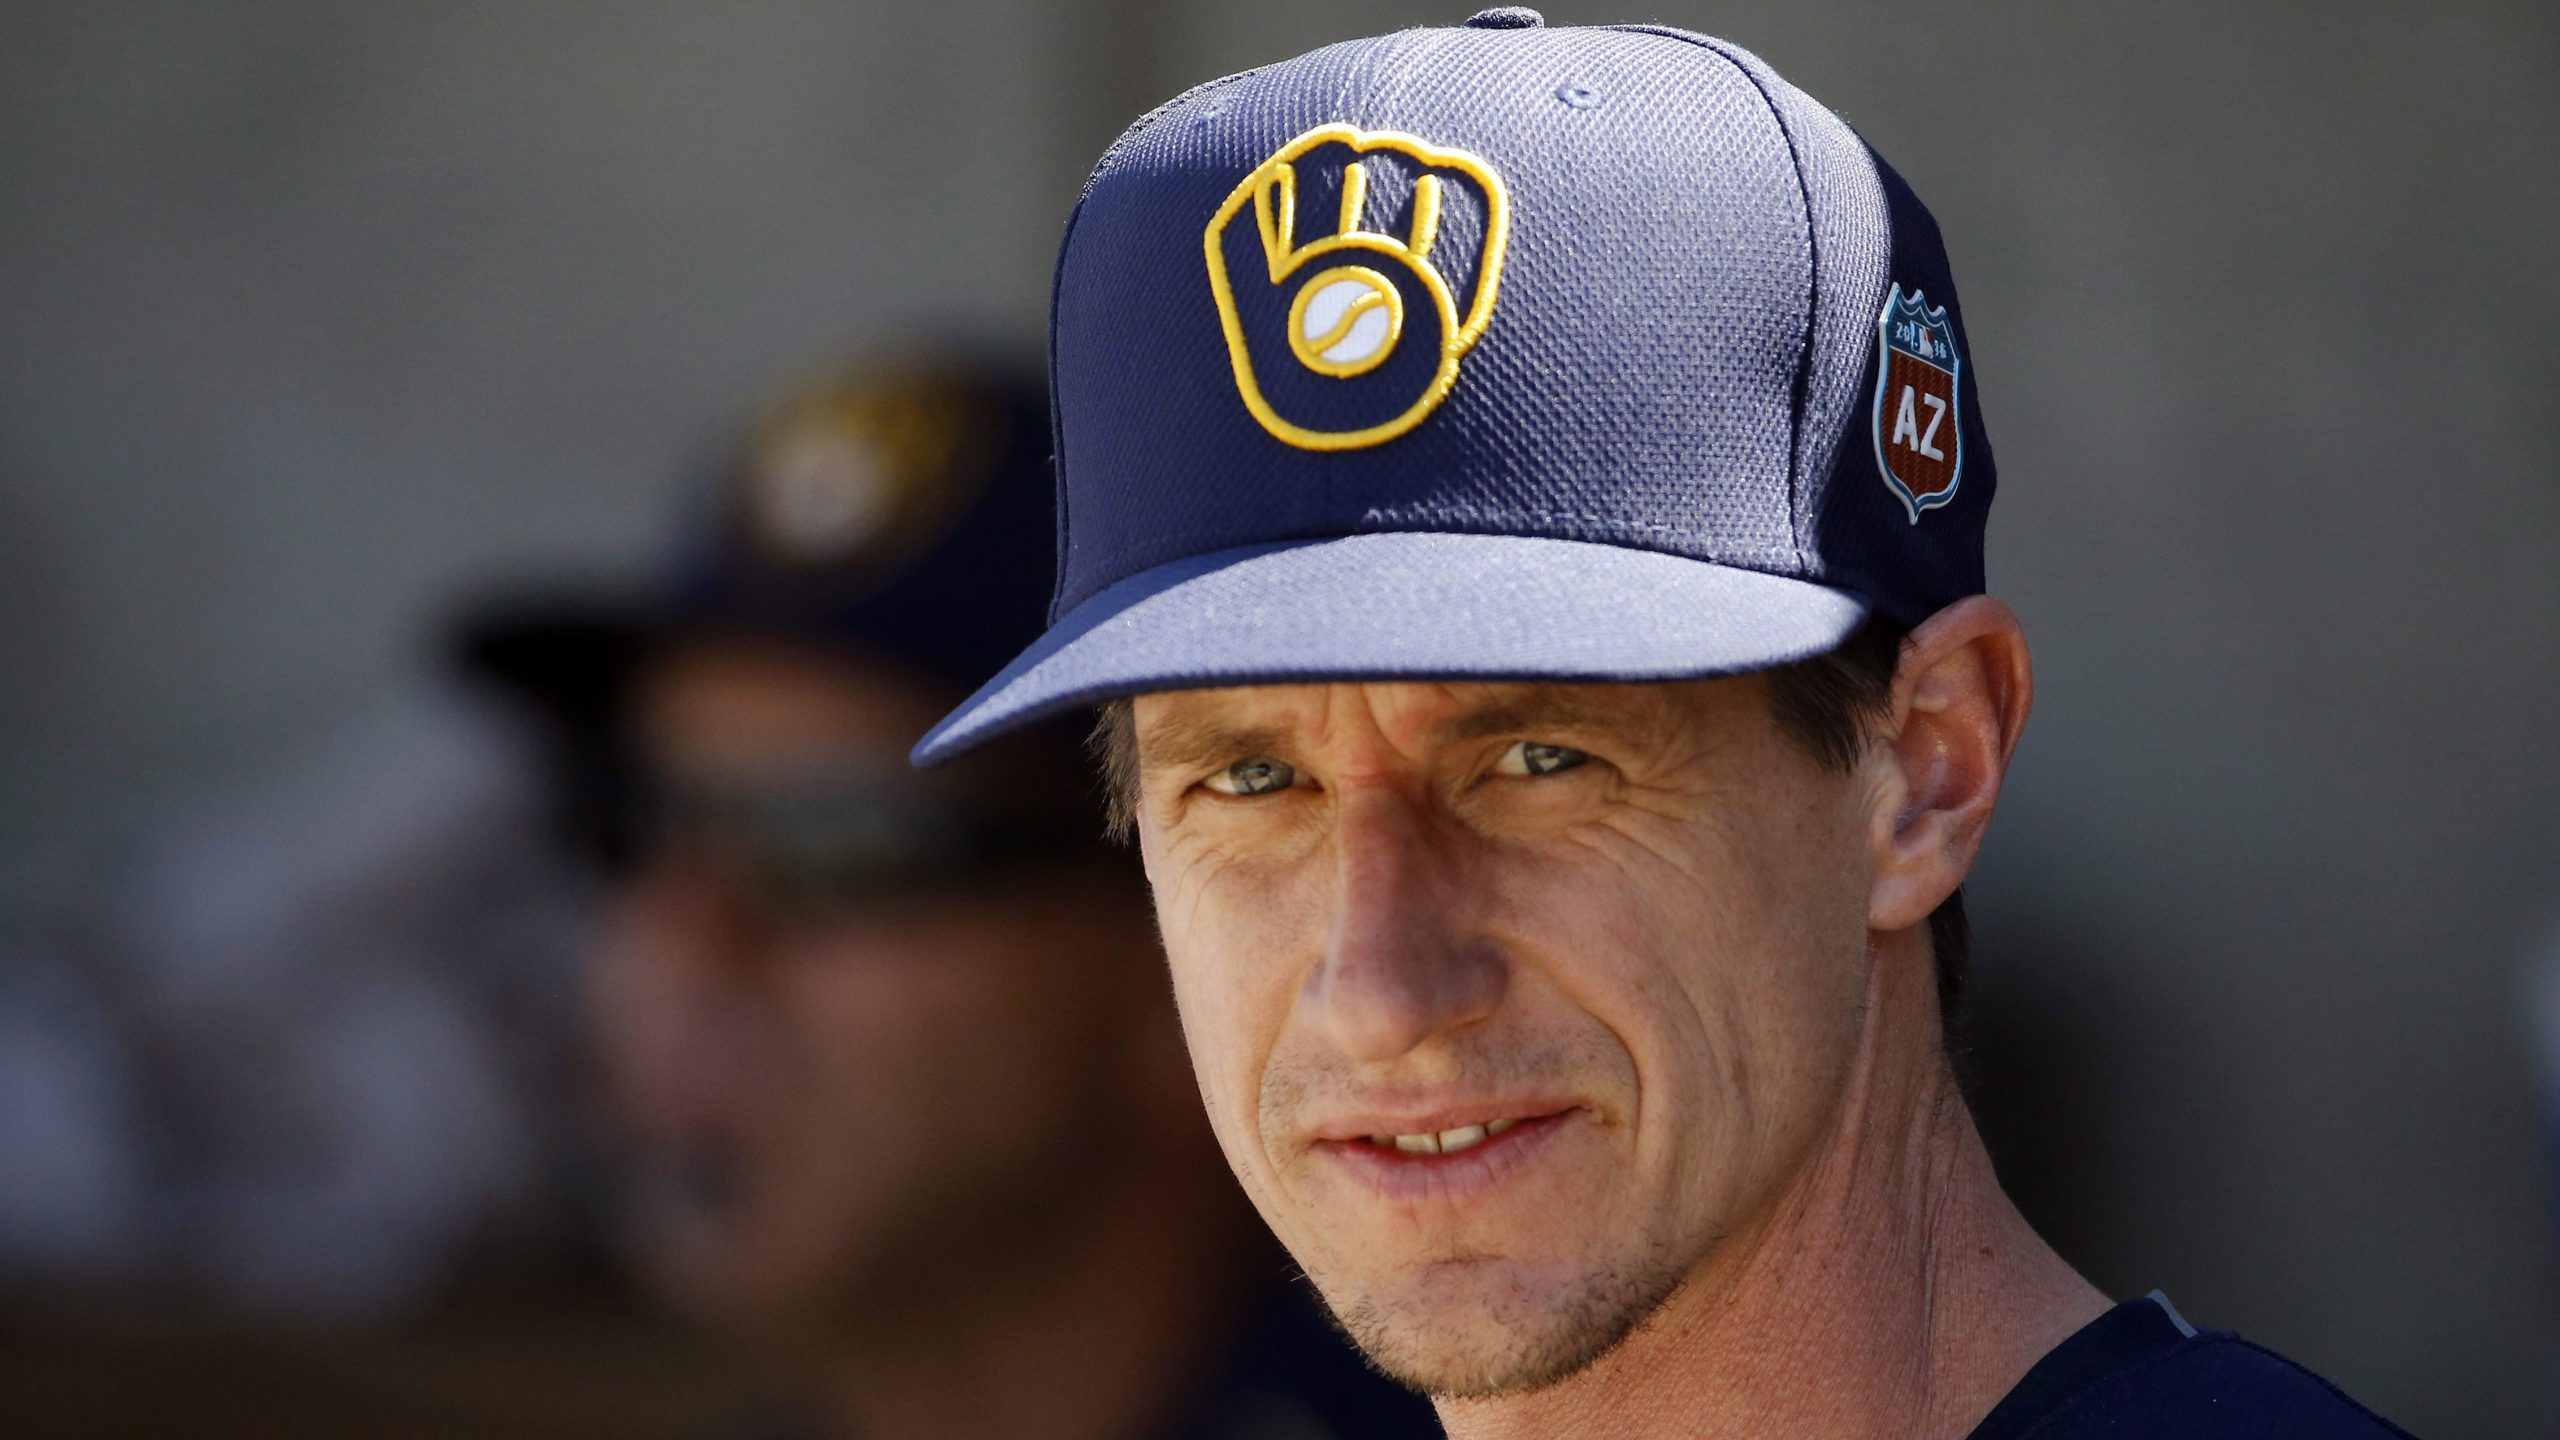 Craig Counsell through years, MLB player, member of Milwaukee Brewers